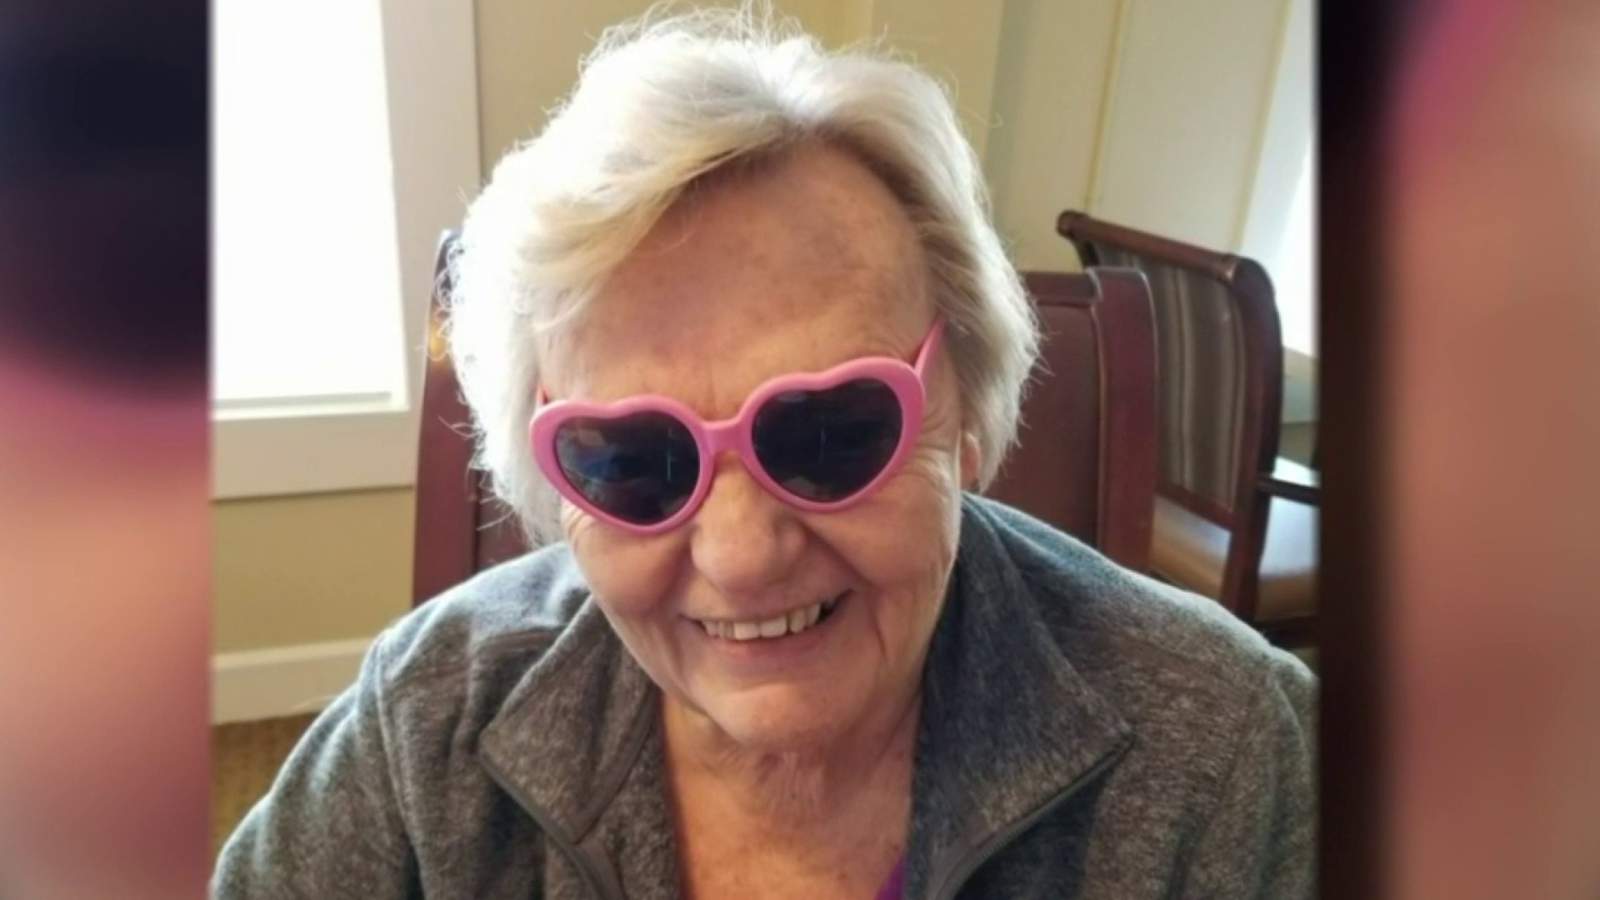 78-year-old Michigan womans COVID-19 rap goes viral